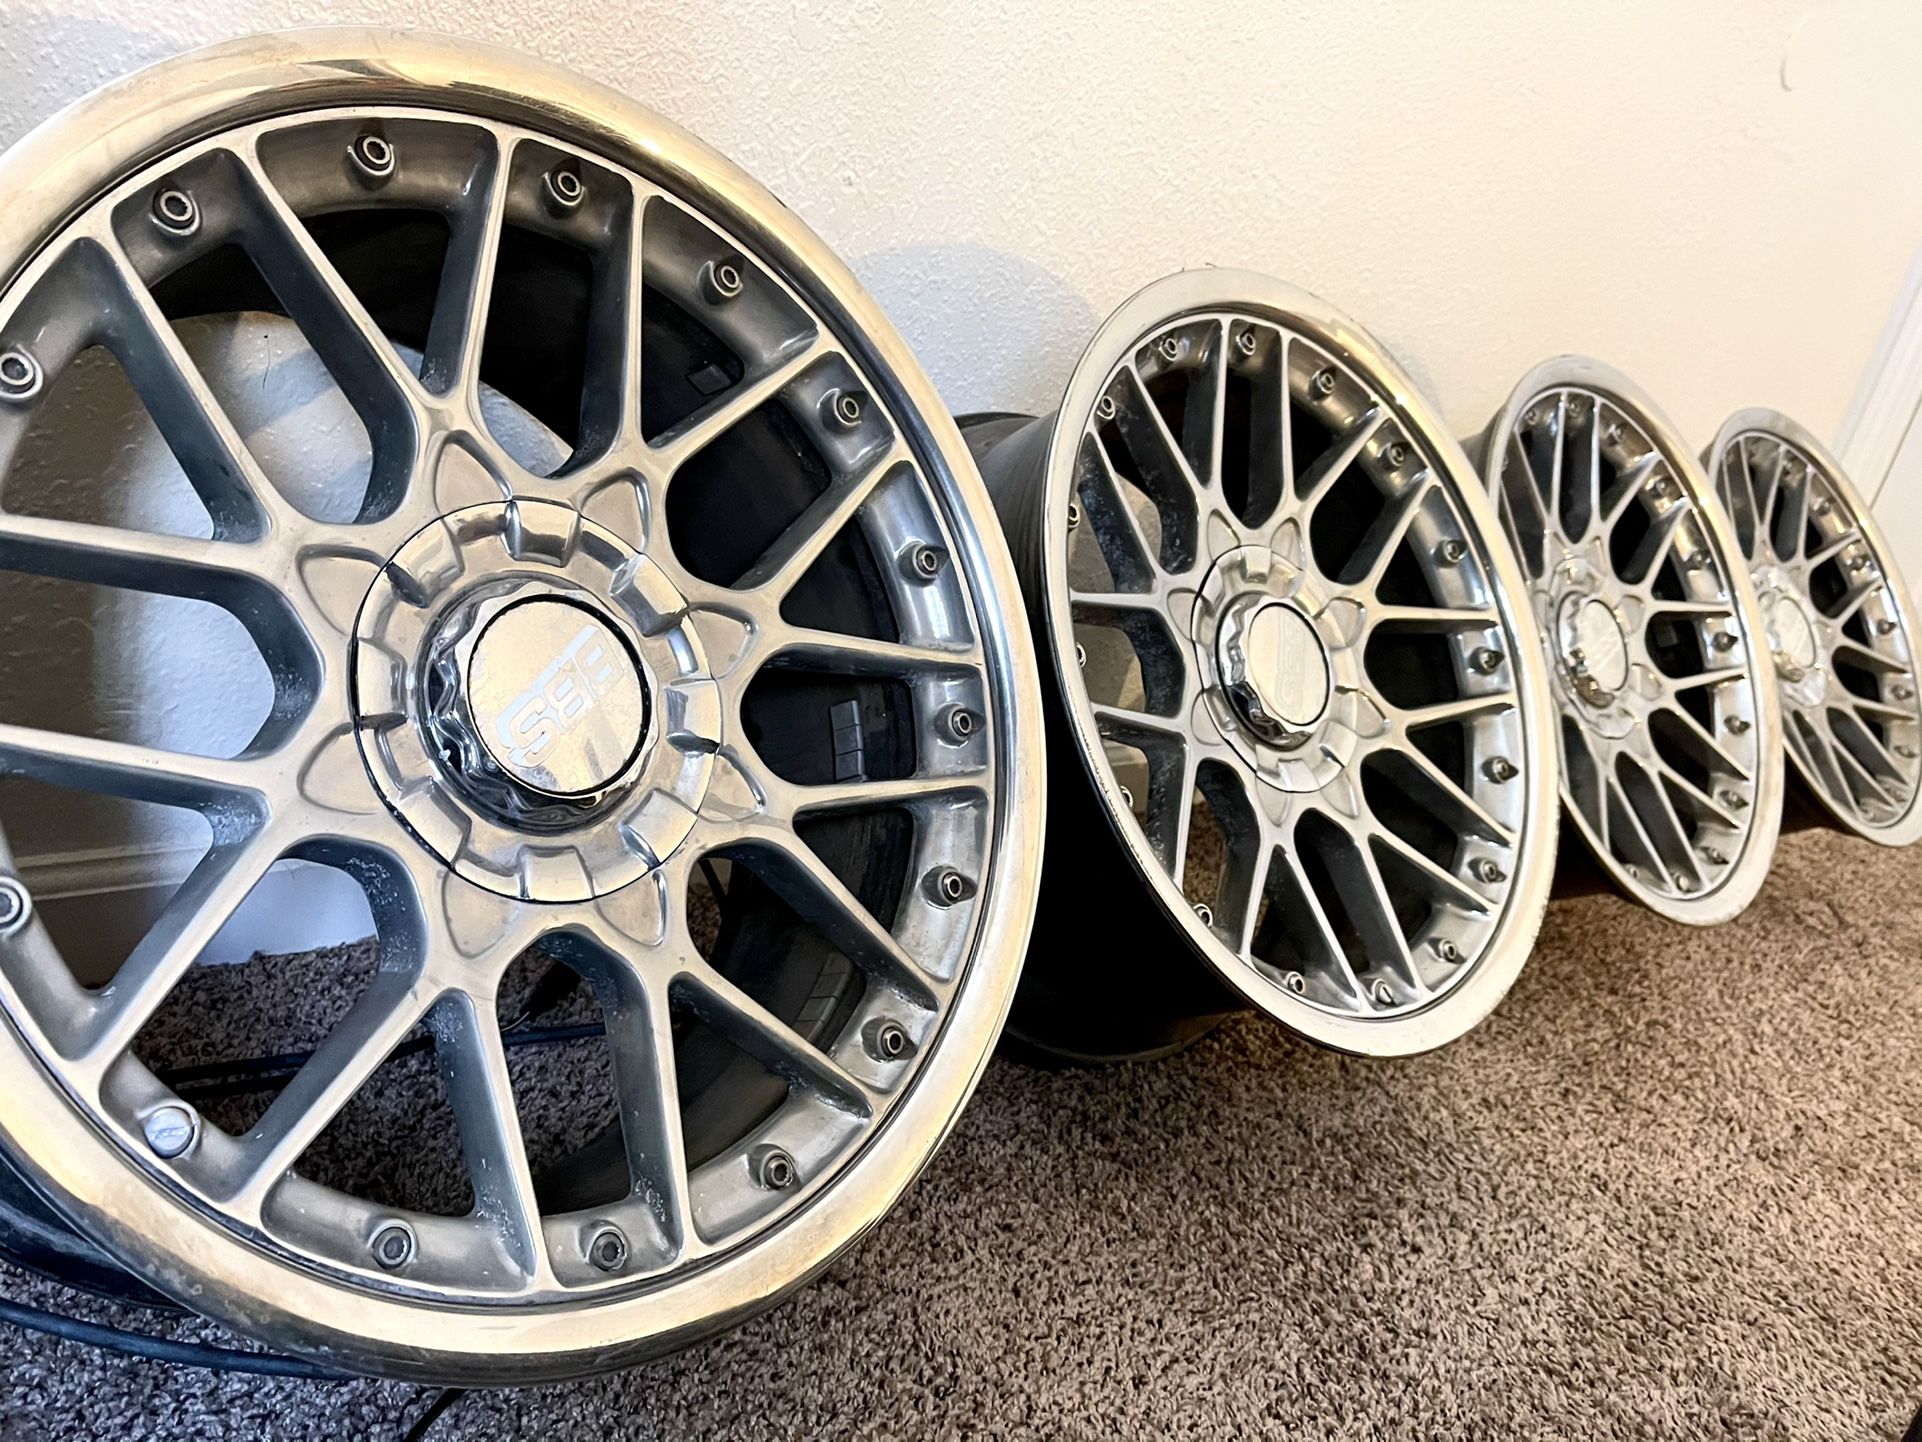 Bbs Rs2 Super Concave 5x120 5x100 for Sale in Sacramento, CA